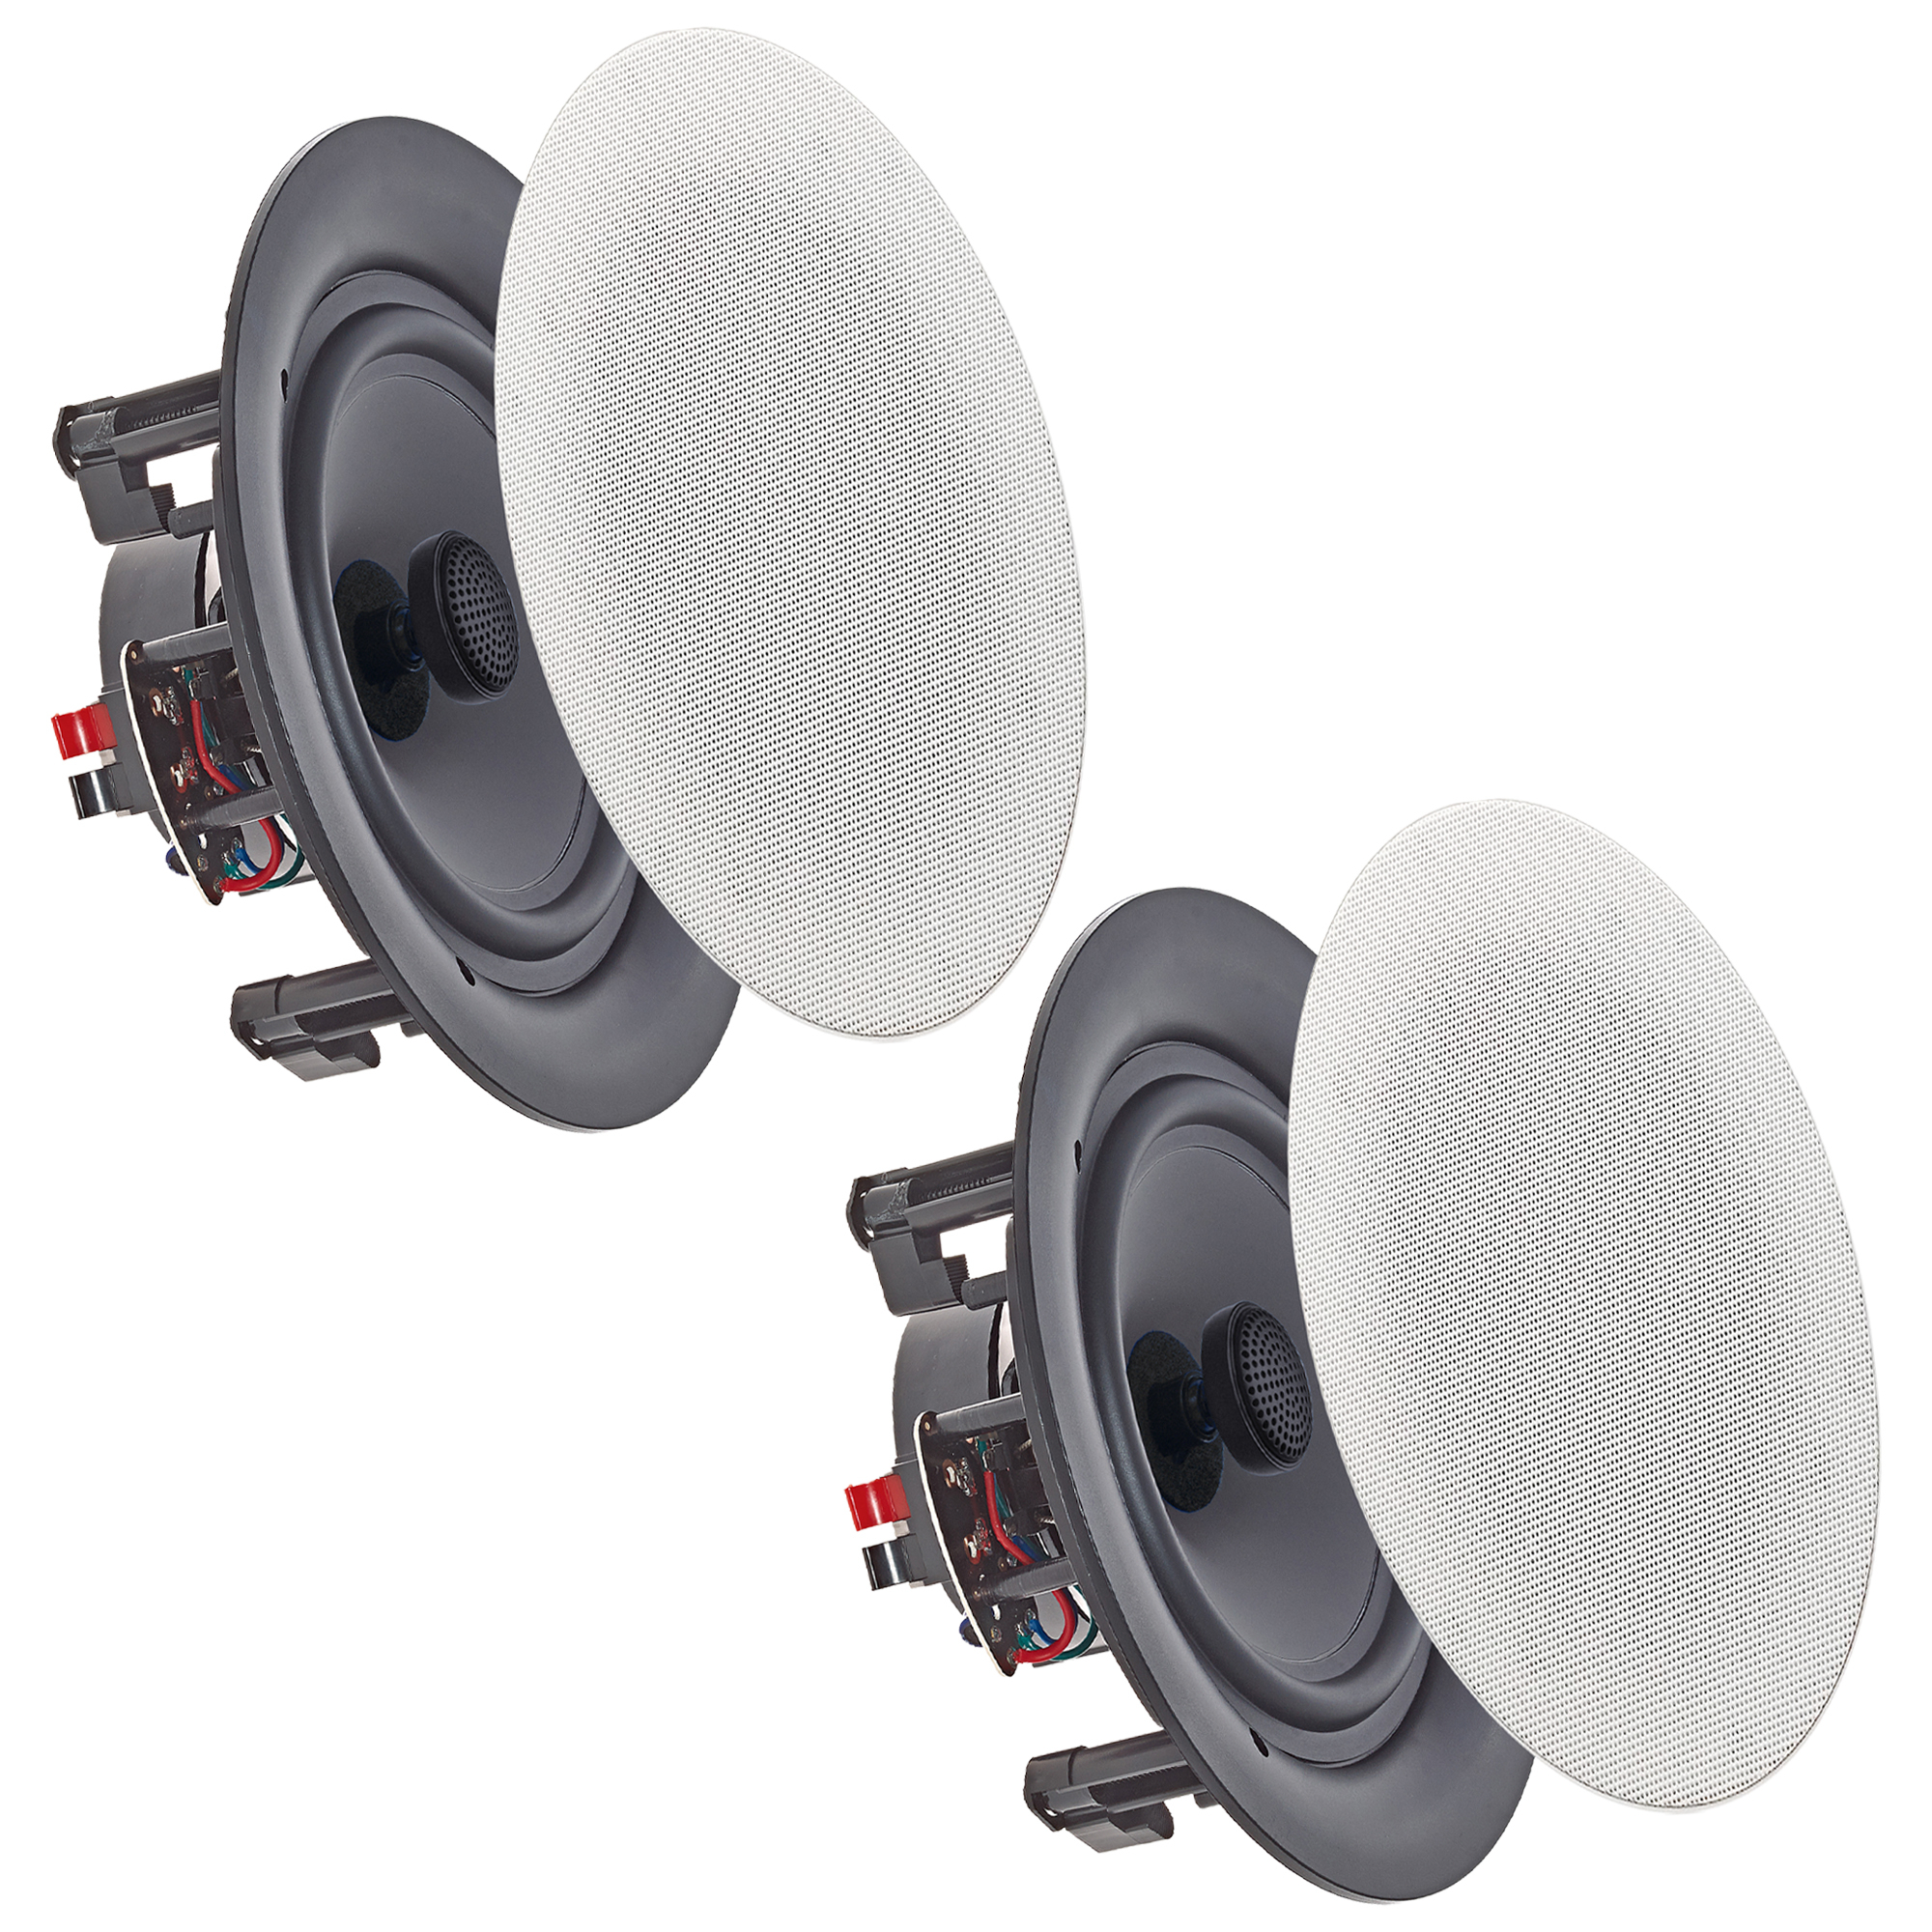 Vaiyer Pair Of 6.5 Inch 8 Ohm 200 Watts Frameless Speakers, Flush Mount In-Wall In-Ceiling 2-Way Mid Bass Woofer Speakers